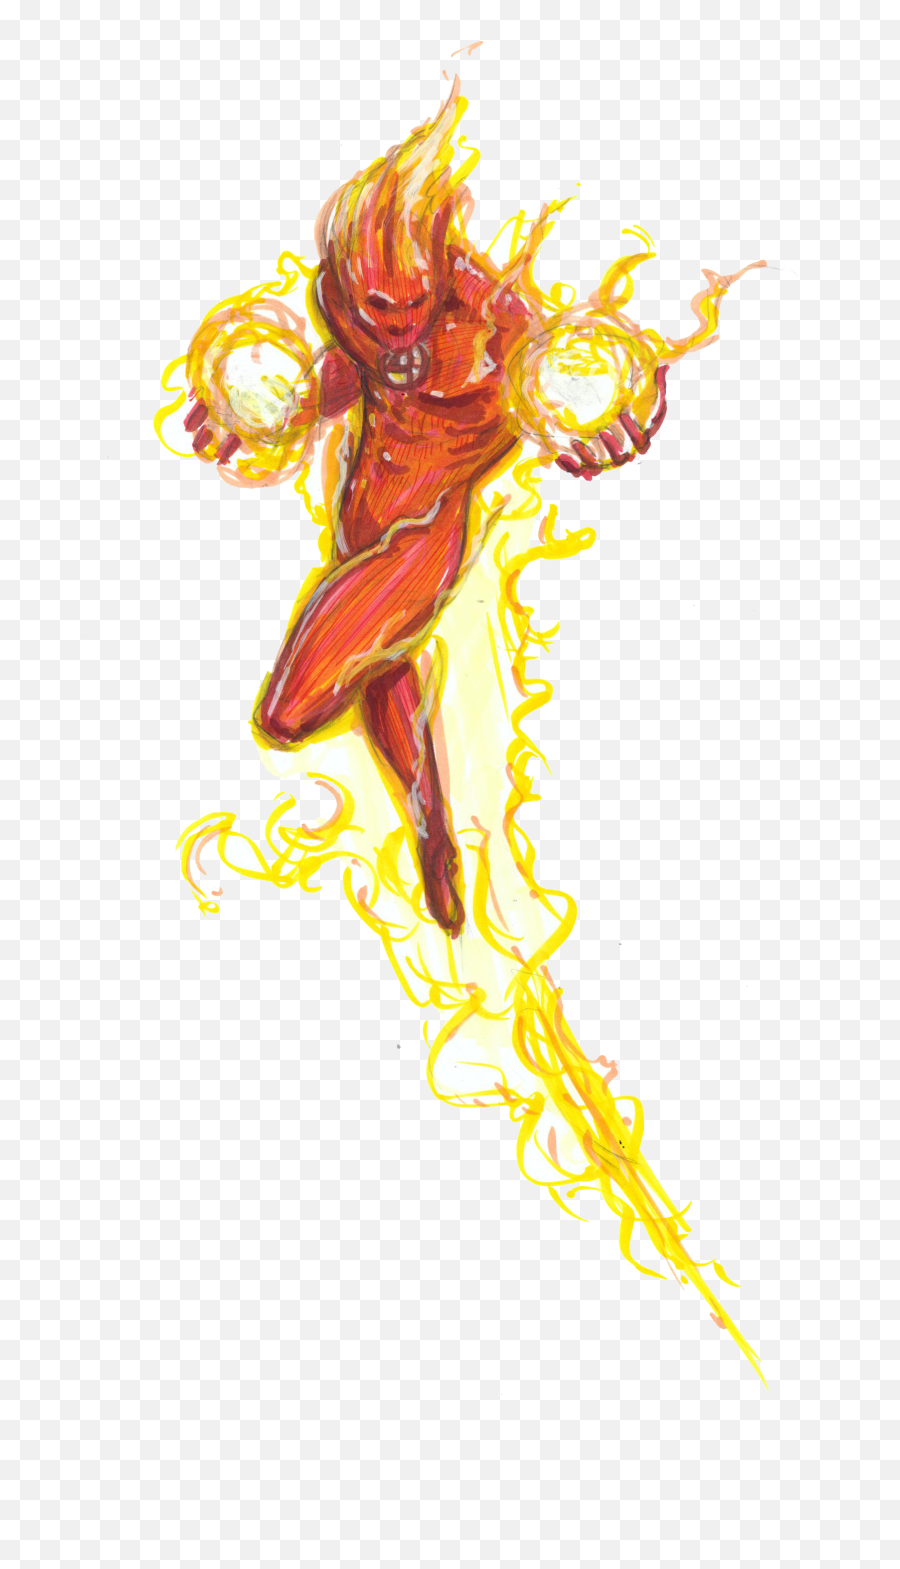 Human Torch Png Hd - Draw The Human Torch,Torch Png